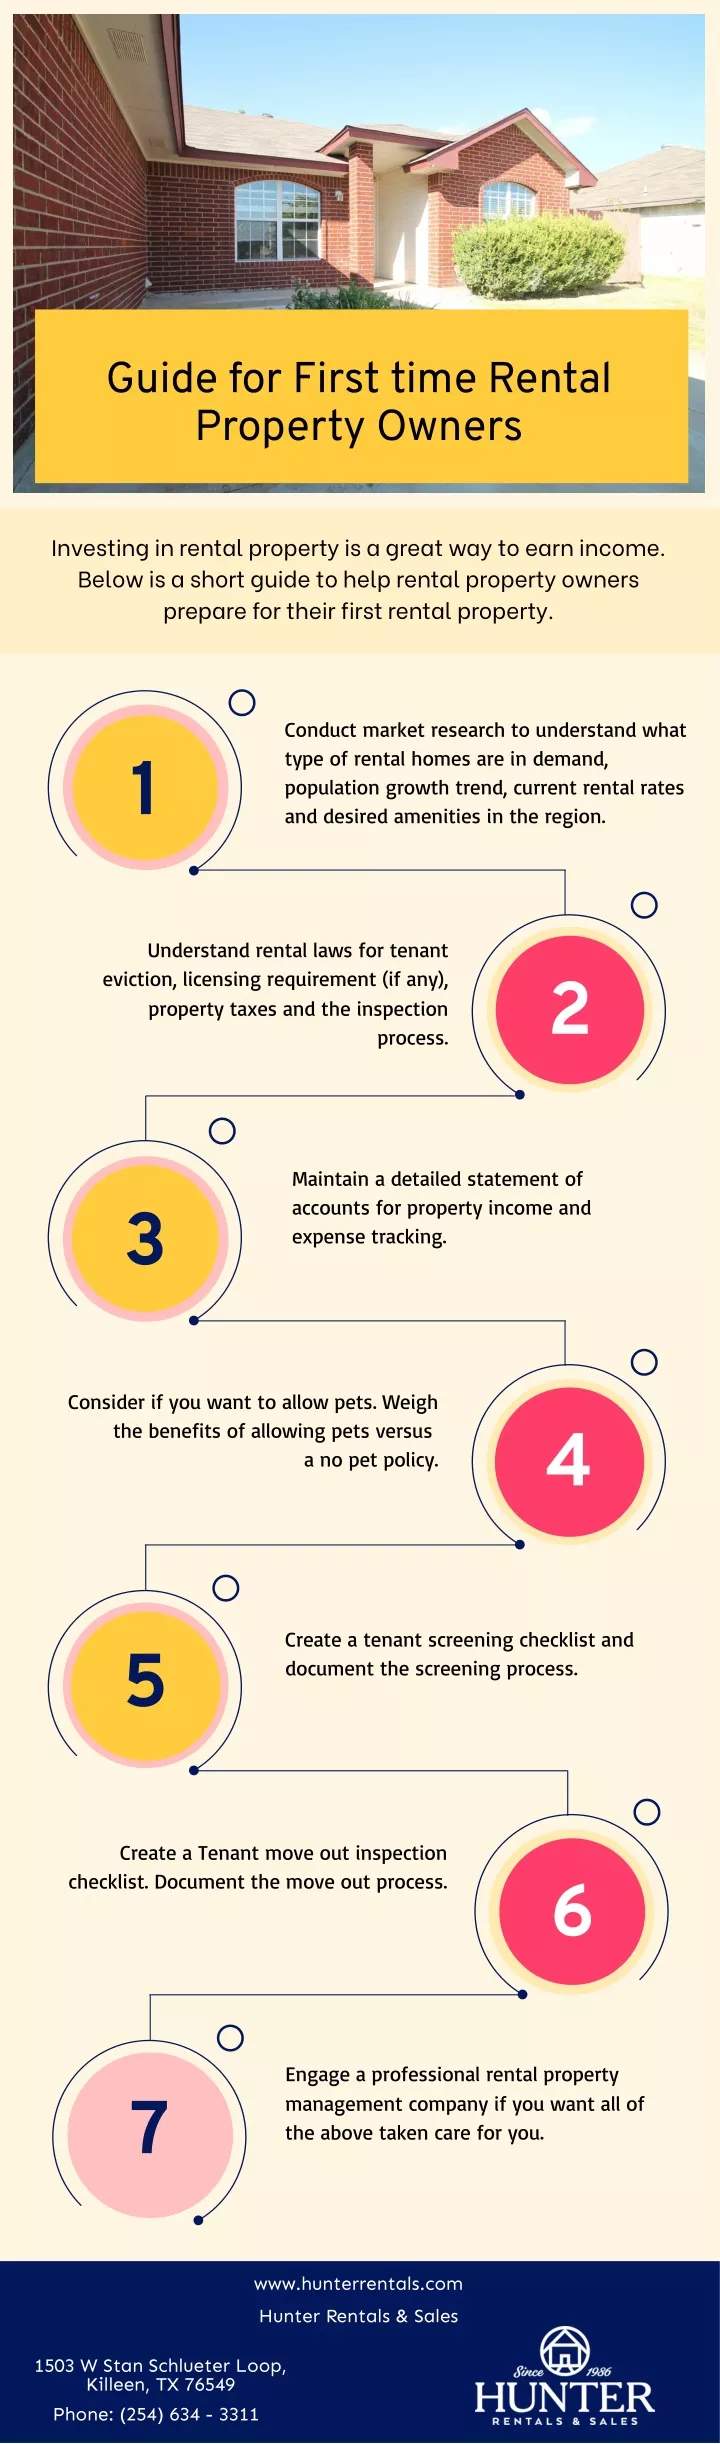 guide for first time rental property owners